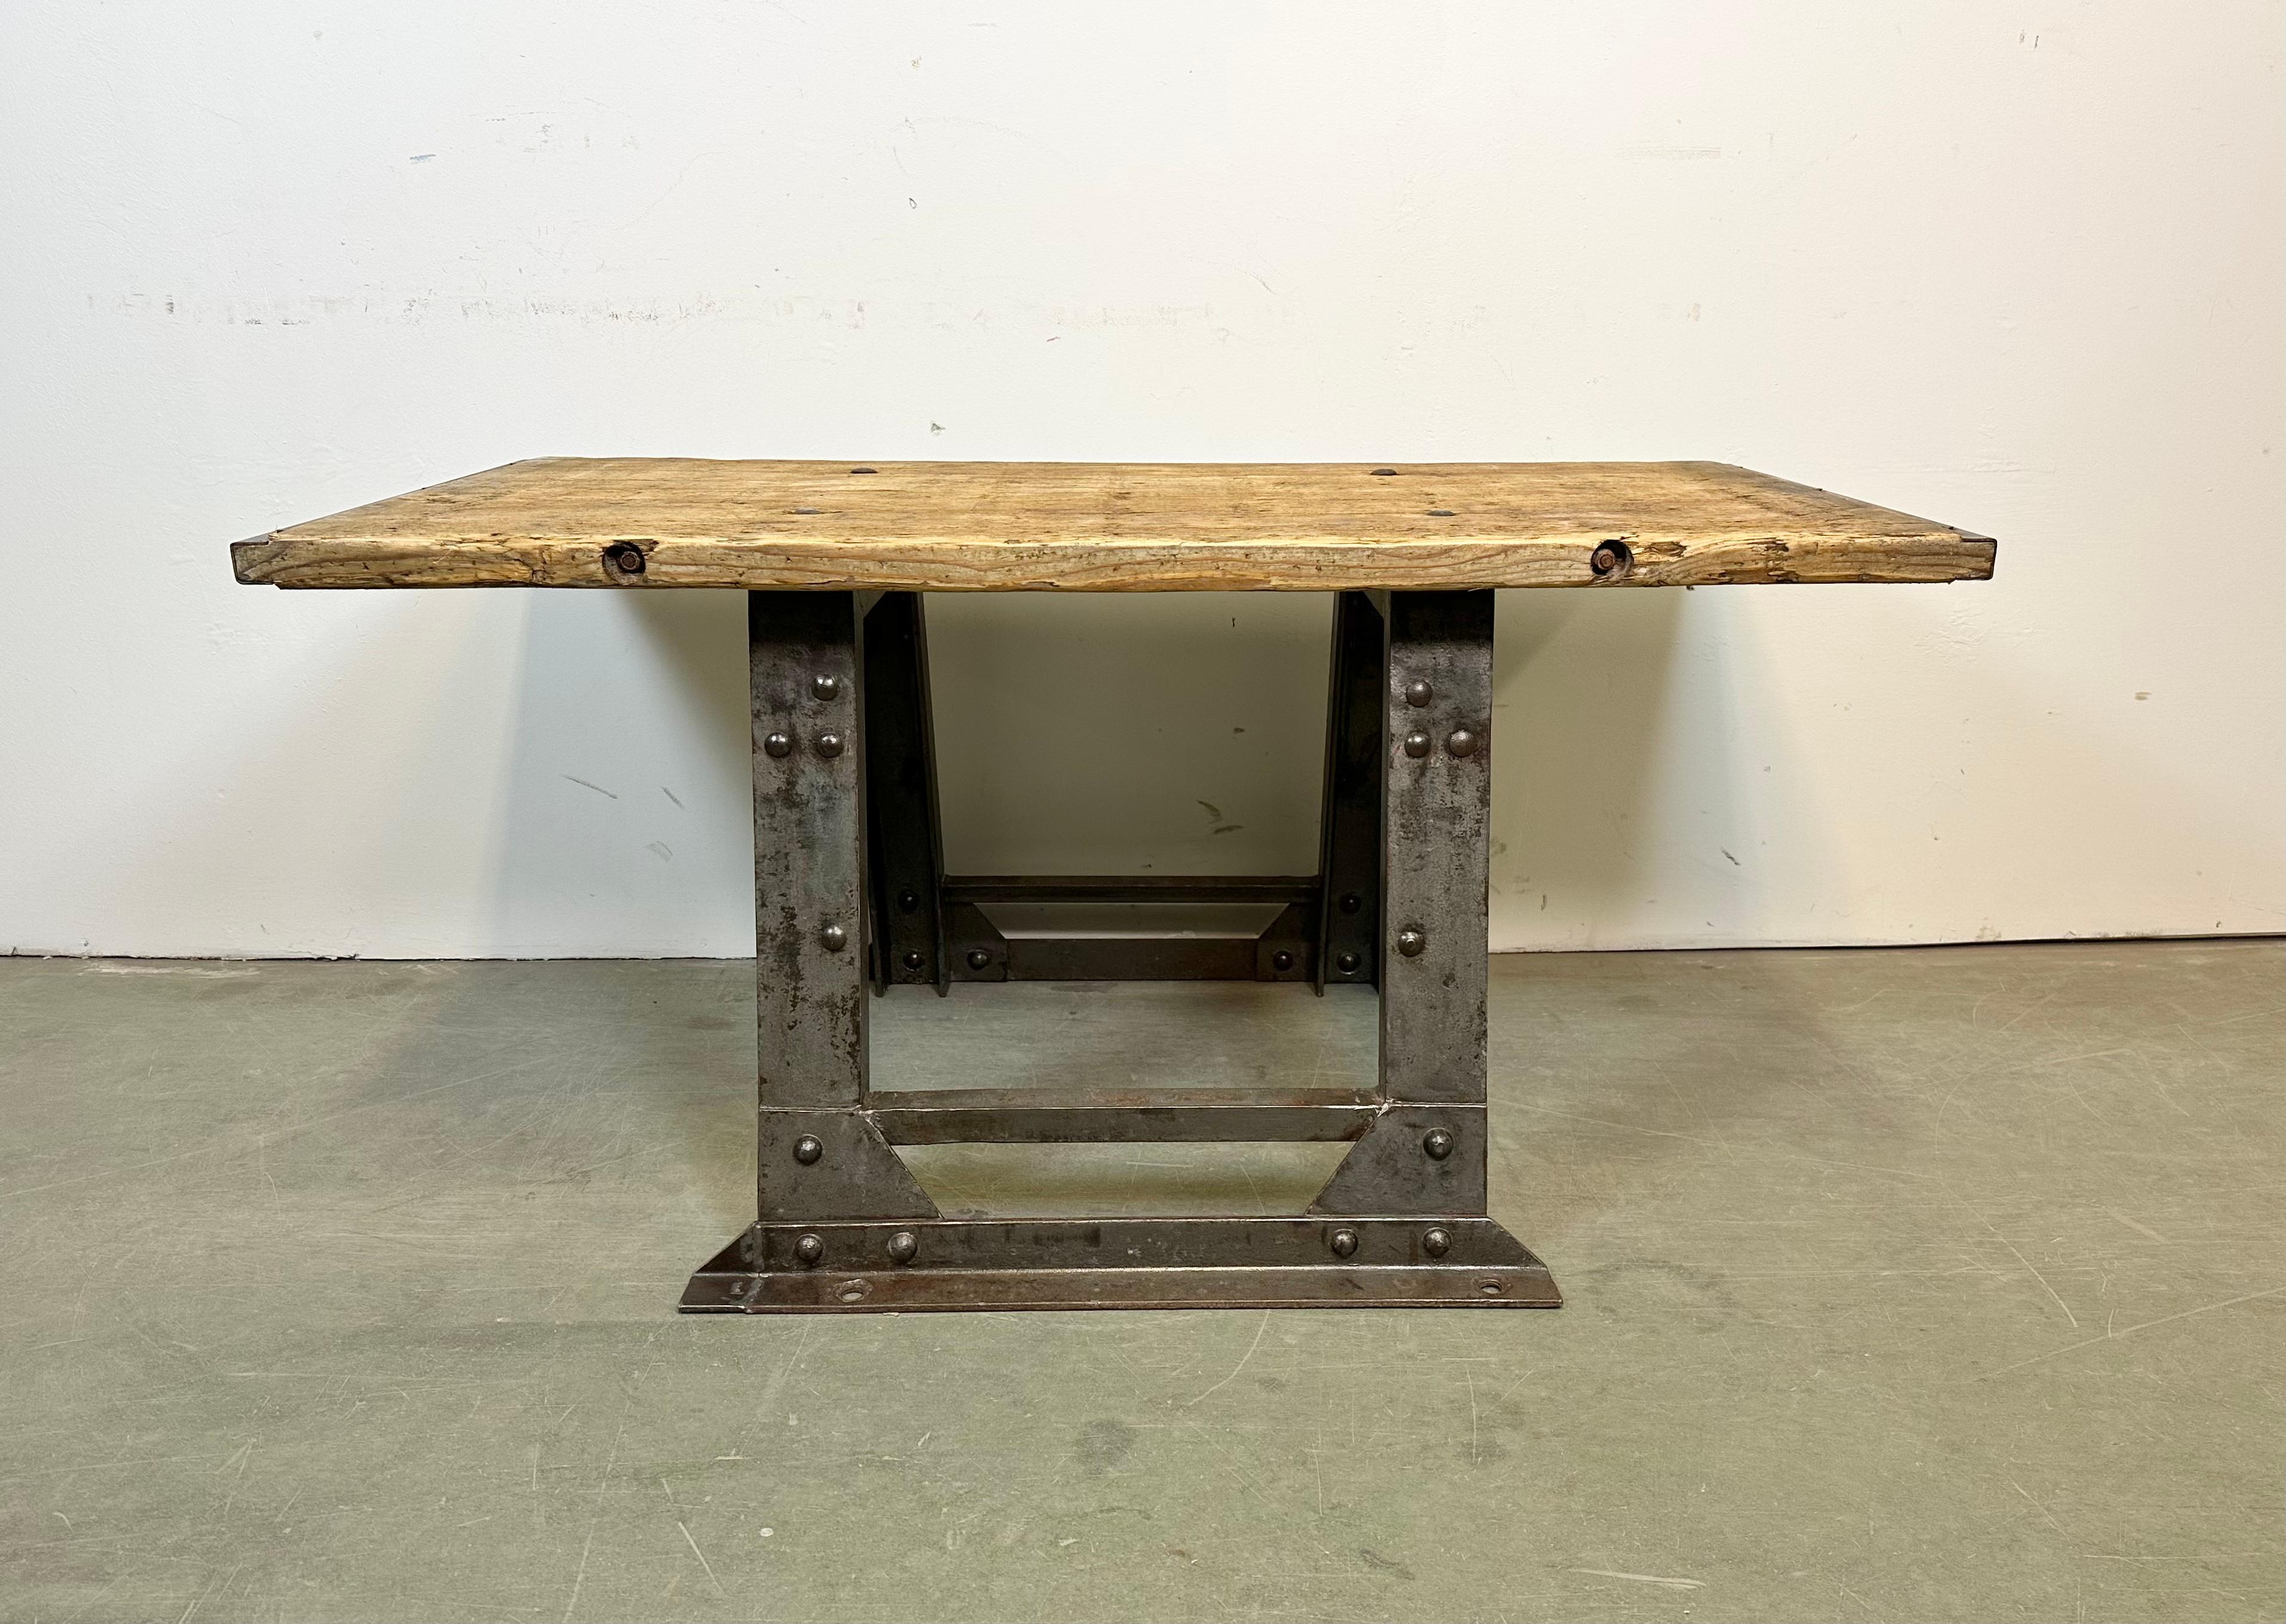 - Vintage Industrial coffee table manufactured in the 1960s 
- Made of solid wood and riveted iron 
- Weight of the table is 52 kg.